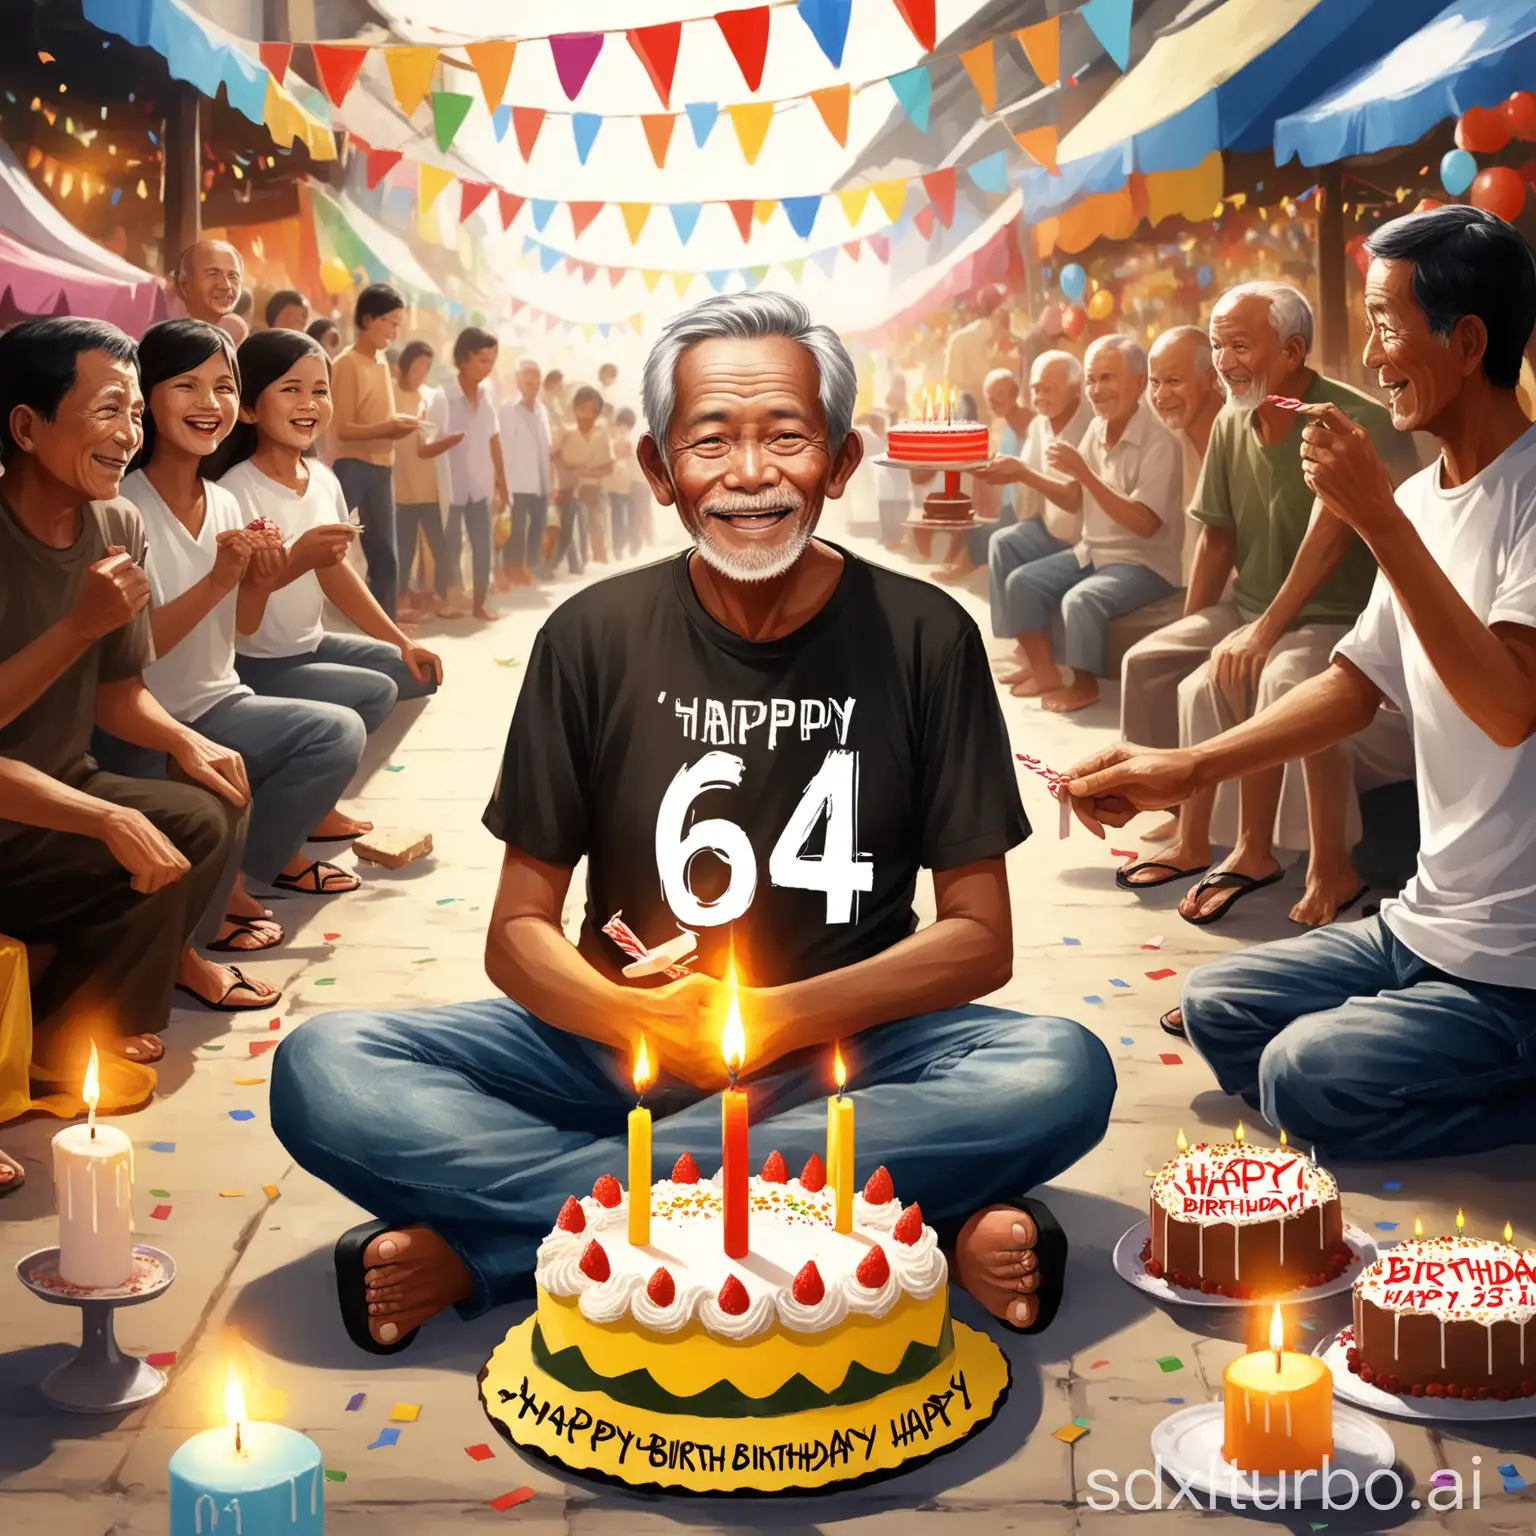 A 64-year-old man with a Javanese Indonesian face, black hair, wearing a T-shirt, jeans, and flip-flops, is sitting cross-legged on the ground while holding a birthday cake and celebrating his birthday. There is a candle burning with the number '64' on the cake, indicating his age. The edge of the cake has writing that says 'Happy Birthday'. The background is a busy market with many people looking at it, creating a happy and joyful atmosphere.